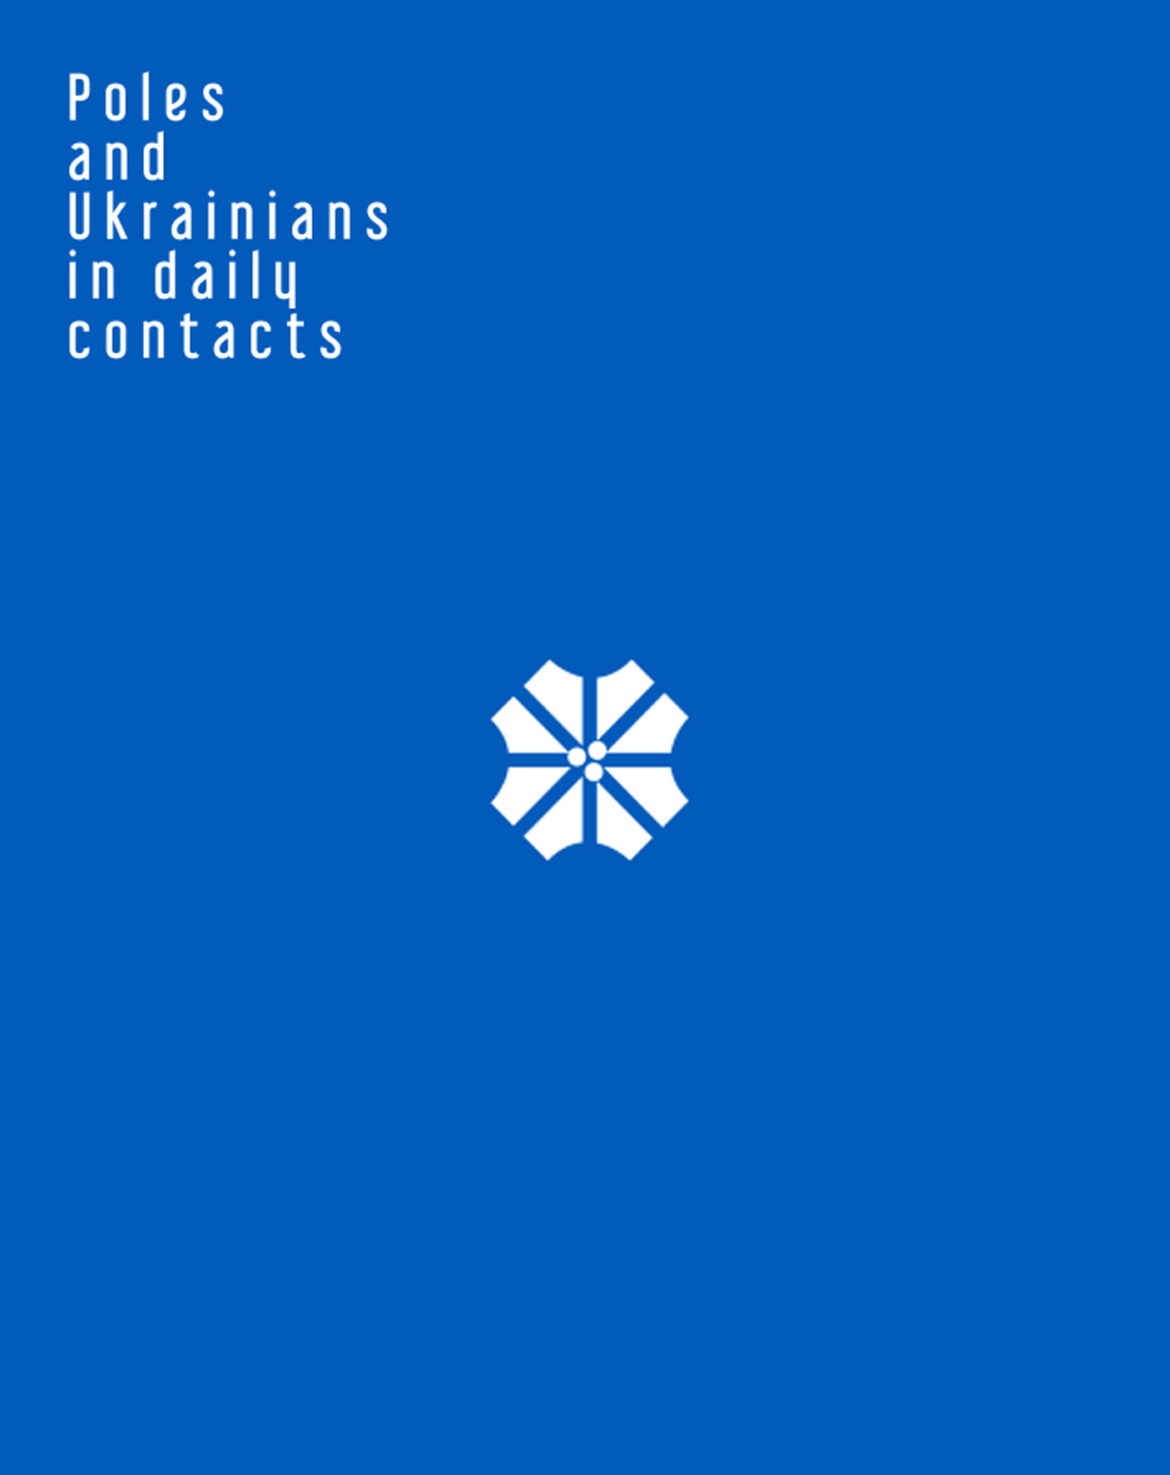 Poles and Ukrainians in daily contacts | Raport